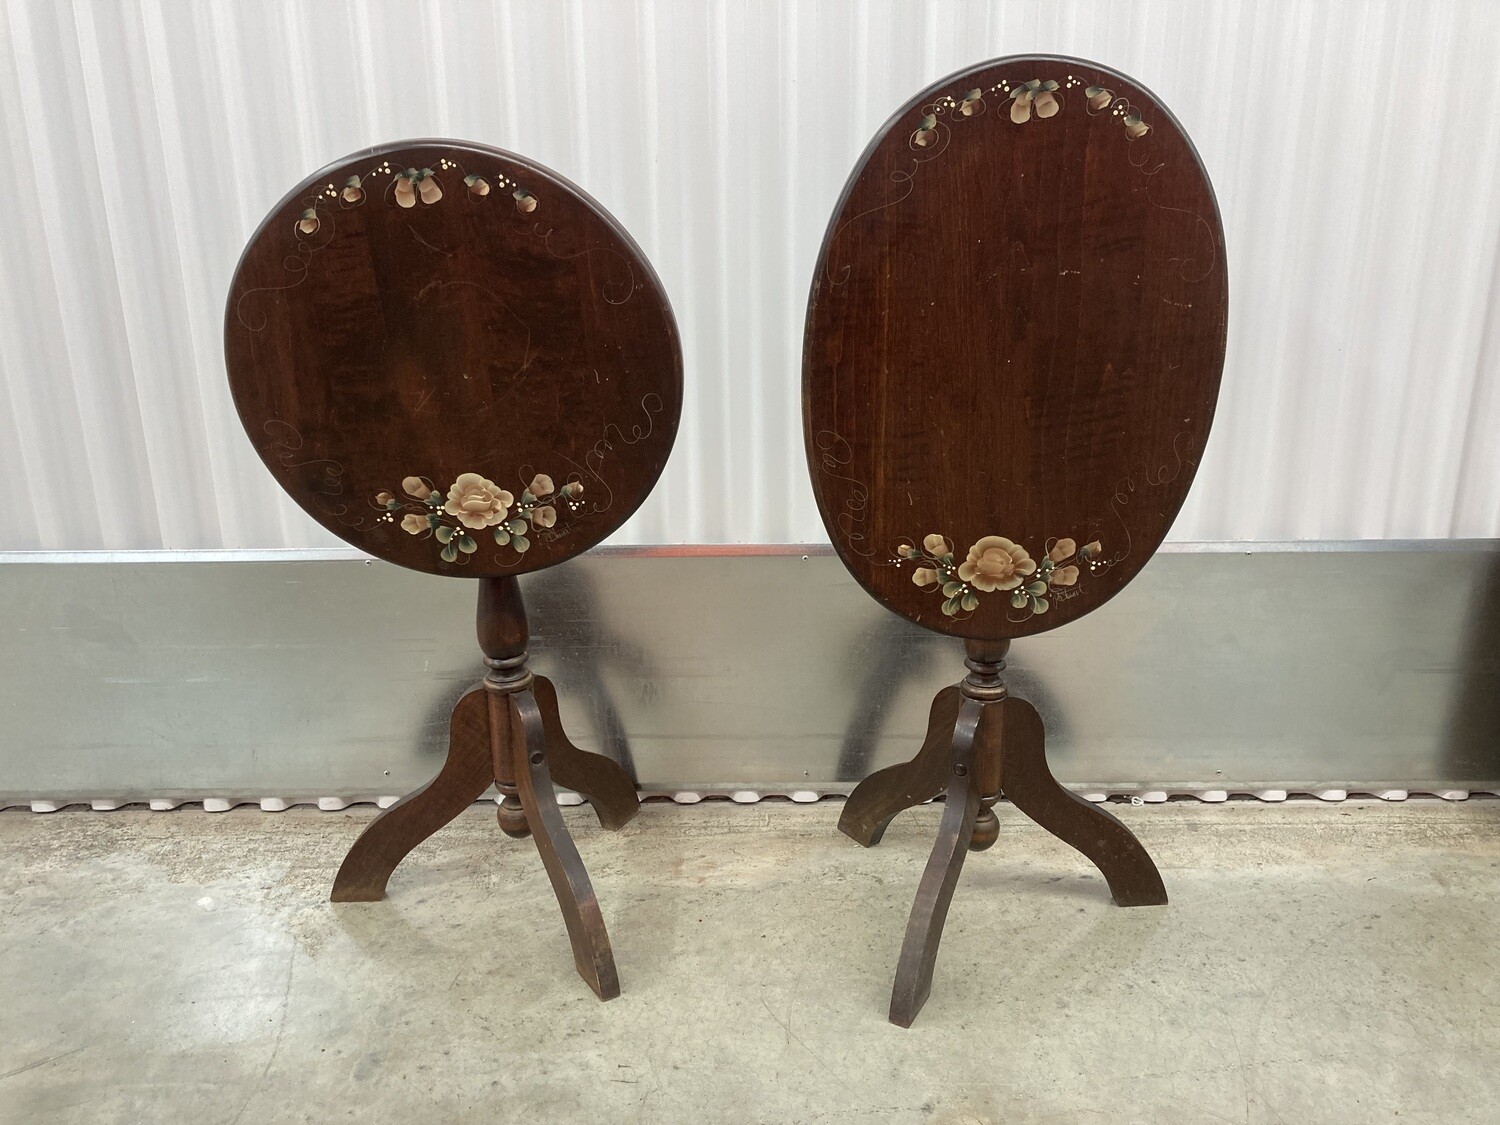 Pair of Tilt-top Accent Tables, hand-painted #2199